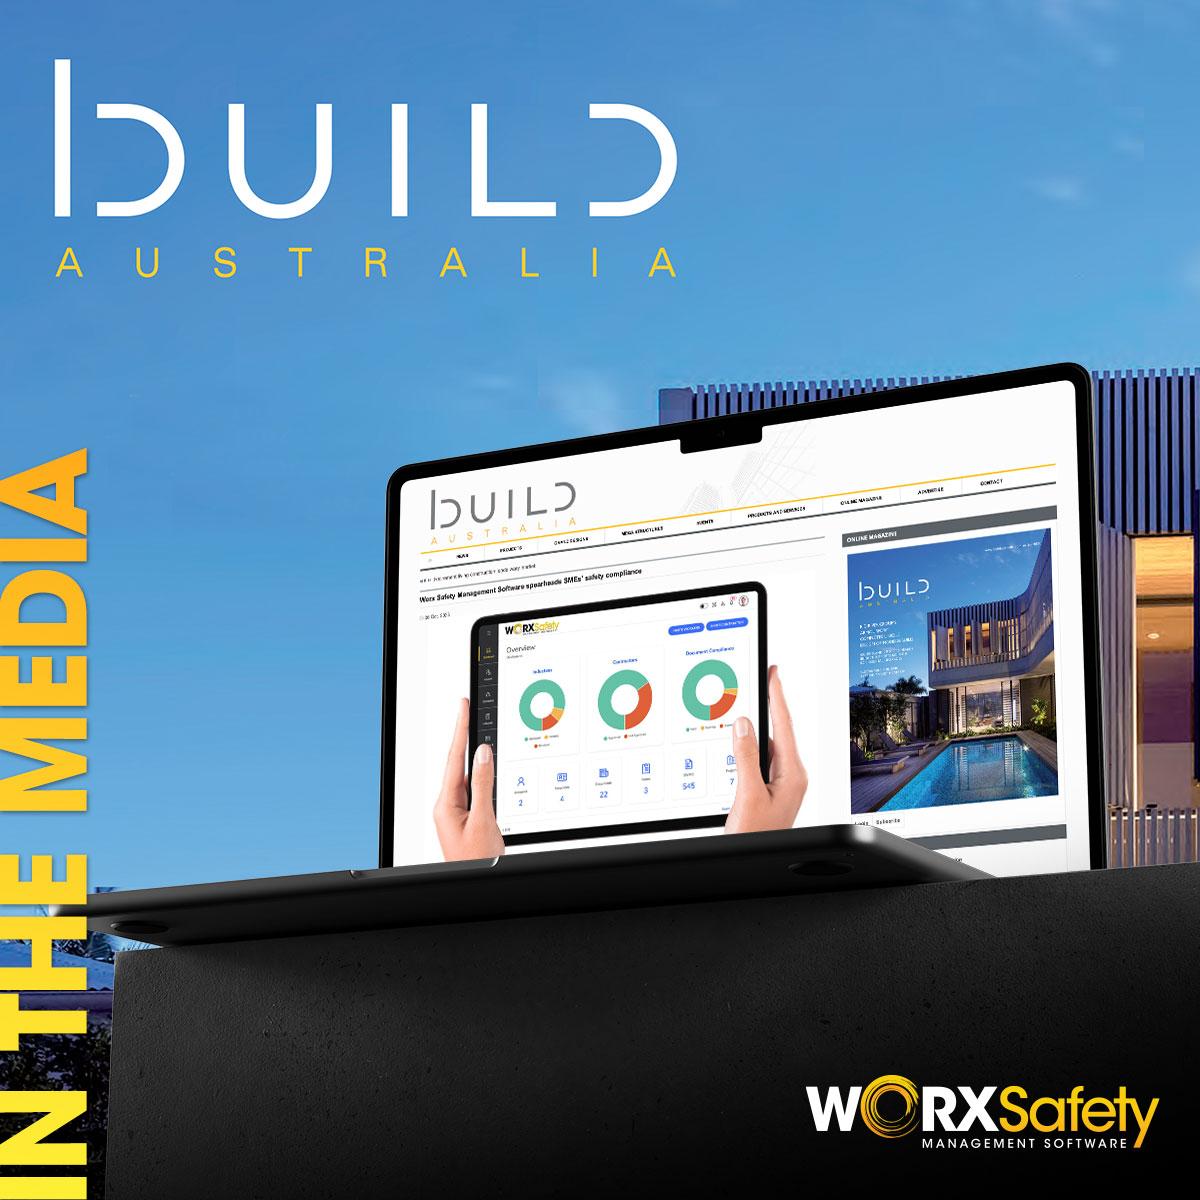 In the Media | Build Australia - Worx Safety Management Software spearheads SMEs’ safety compliance